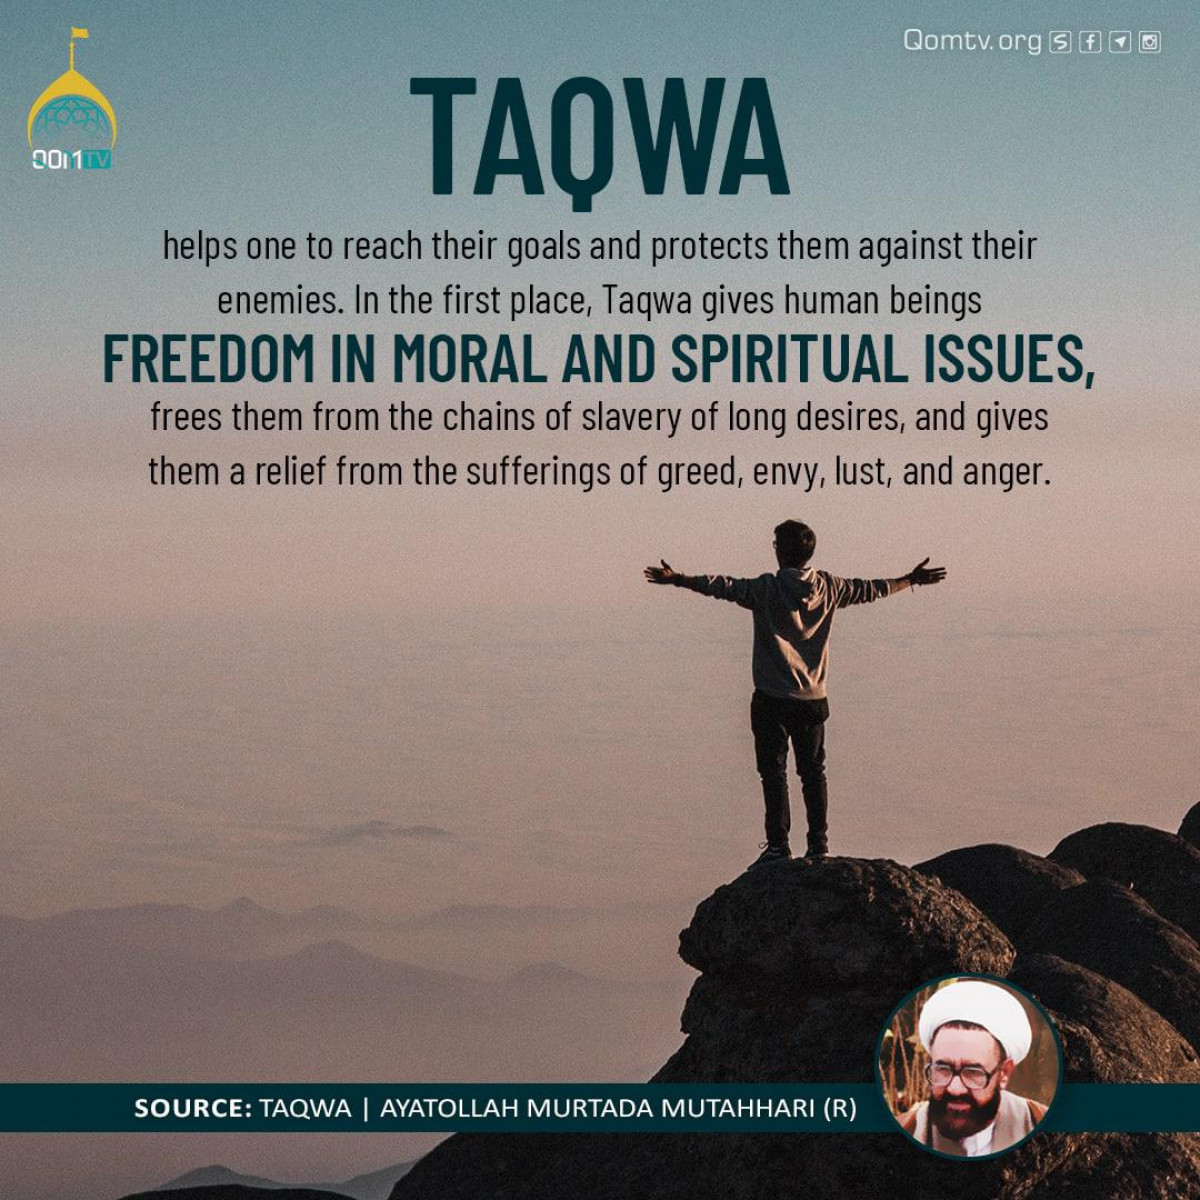 Taqwa helps one to reach their goals and protects them against their enemies